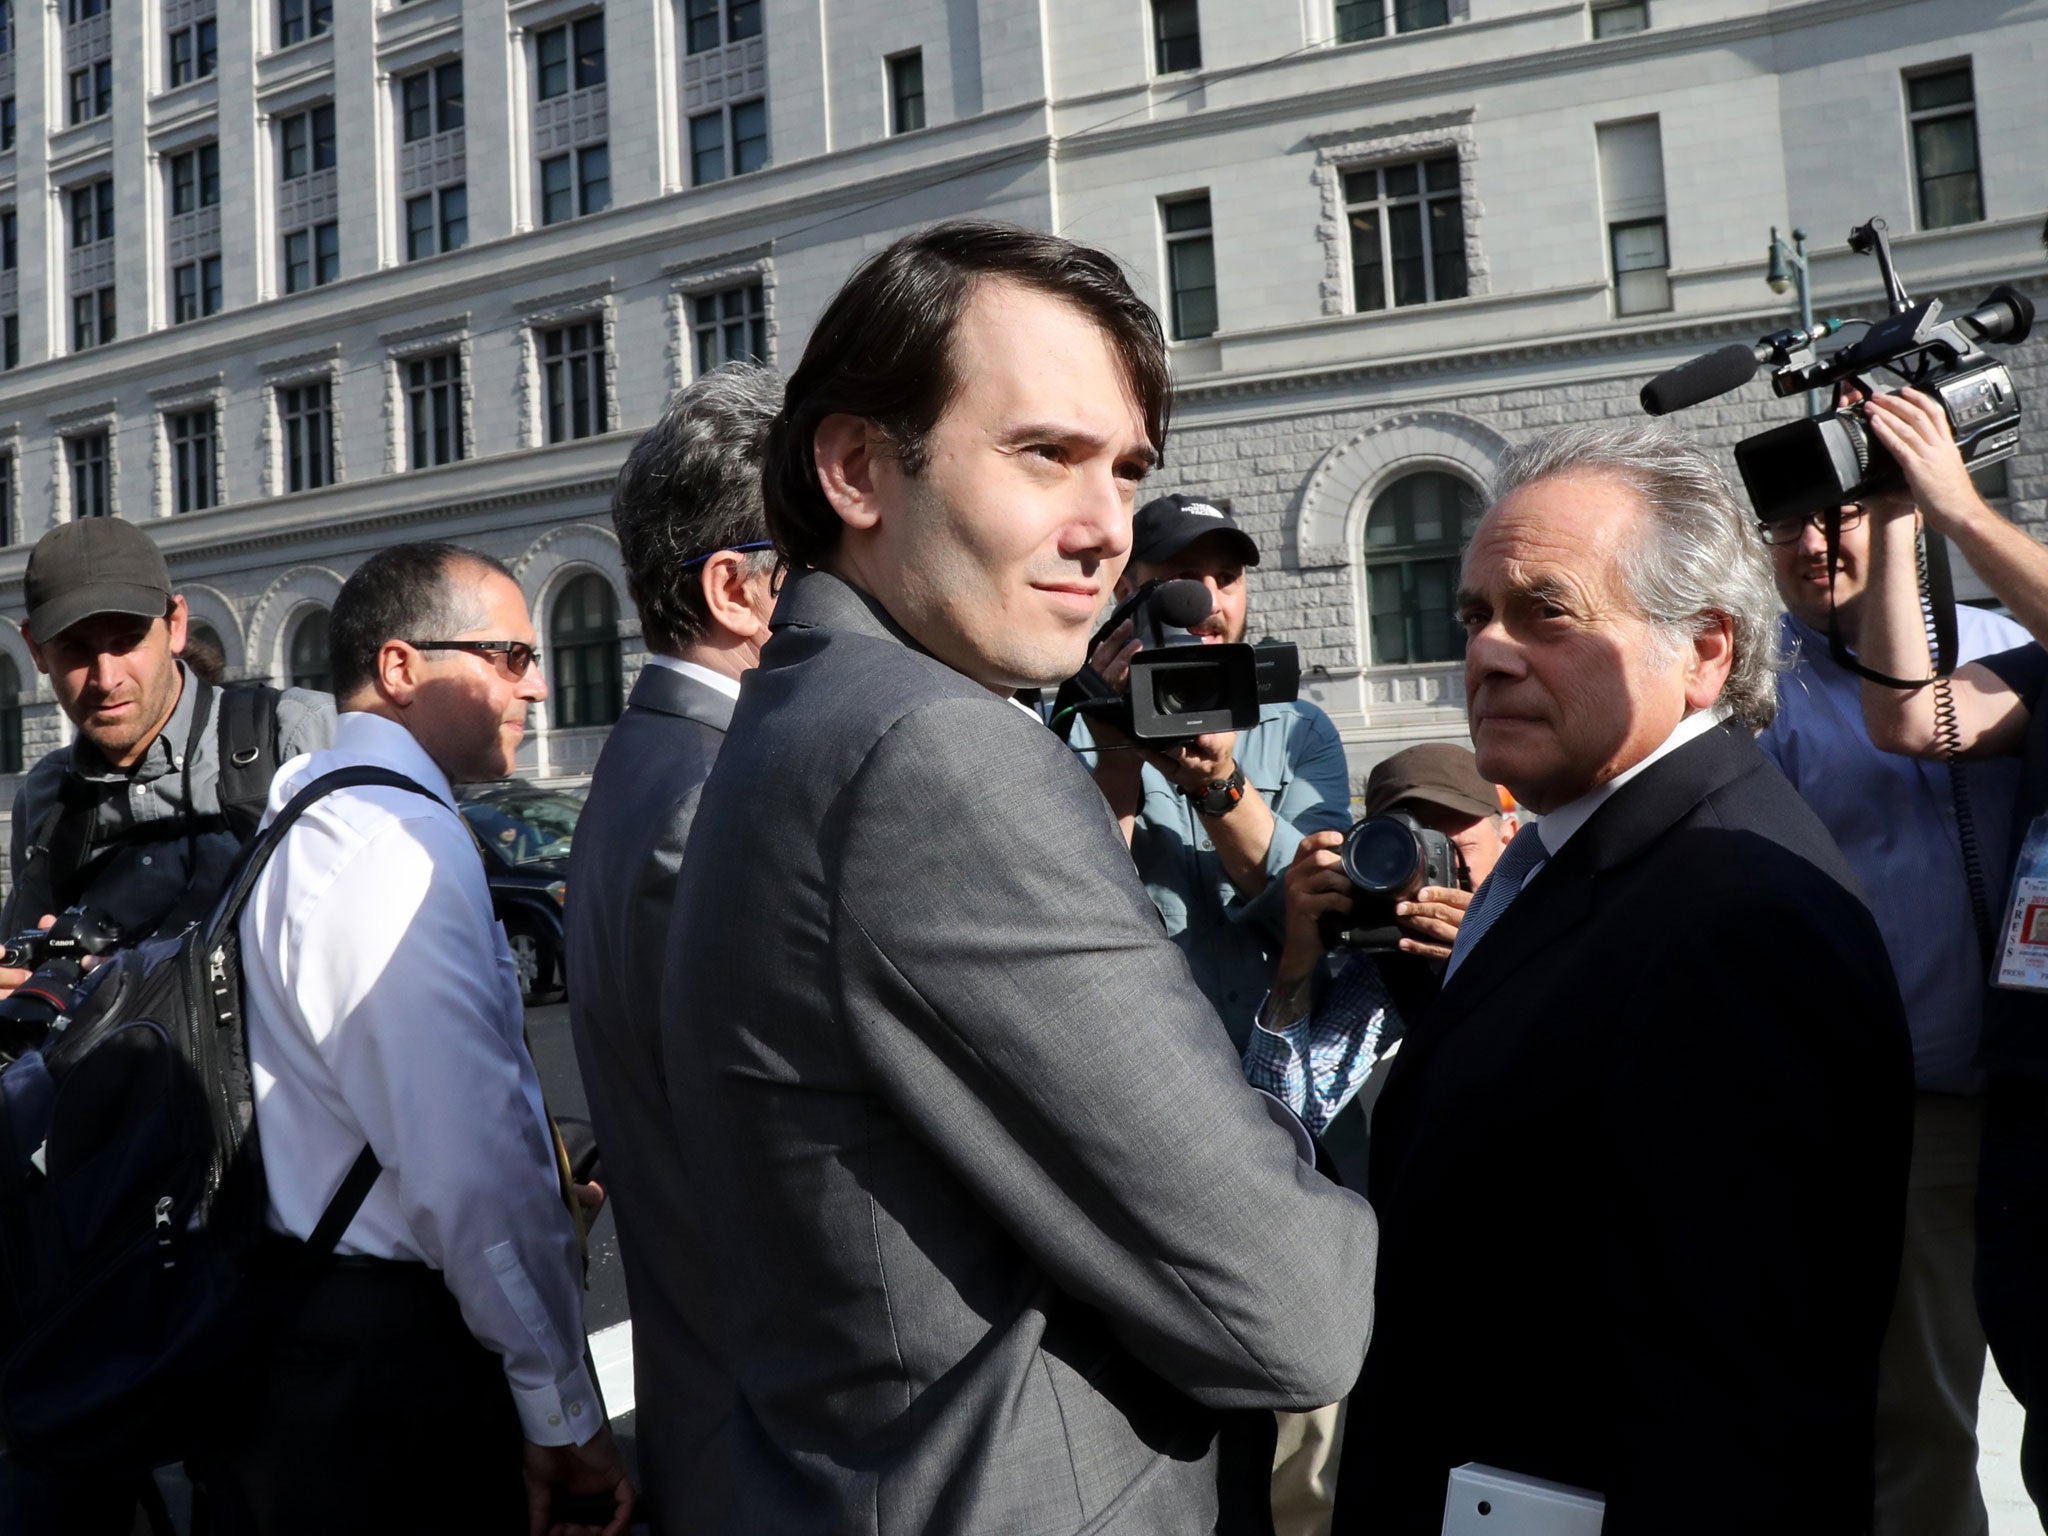 Martin Shkreli leaving the United States Federal courthouse in Brooklyn